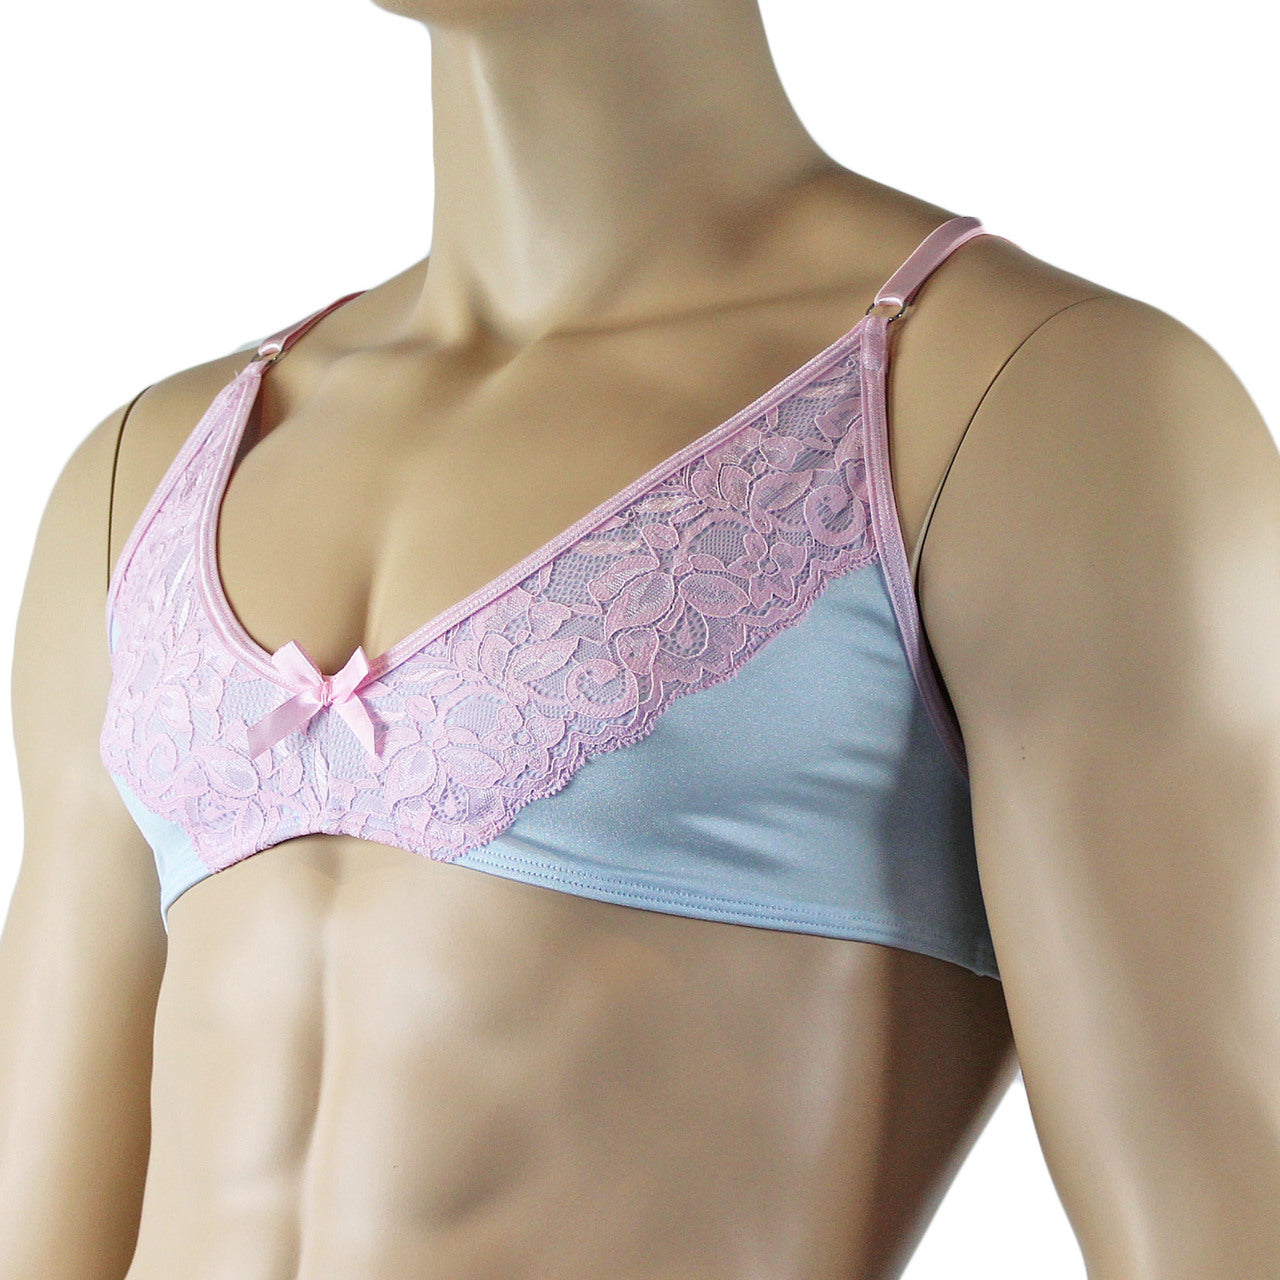 Mens Isabel Bra Top with Floral Lace Trim Male Lingerie Light Blue and Pink Lace